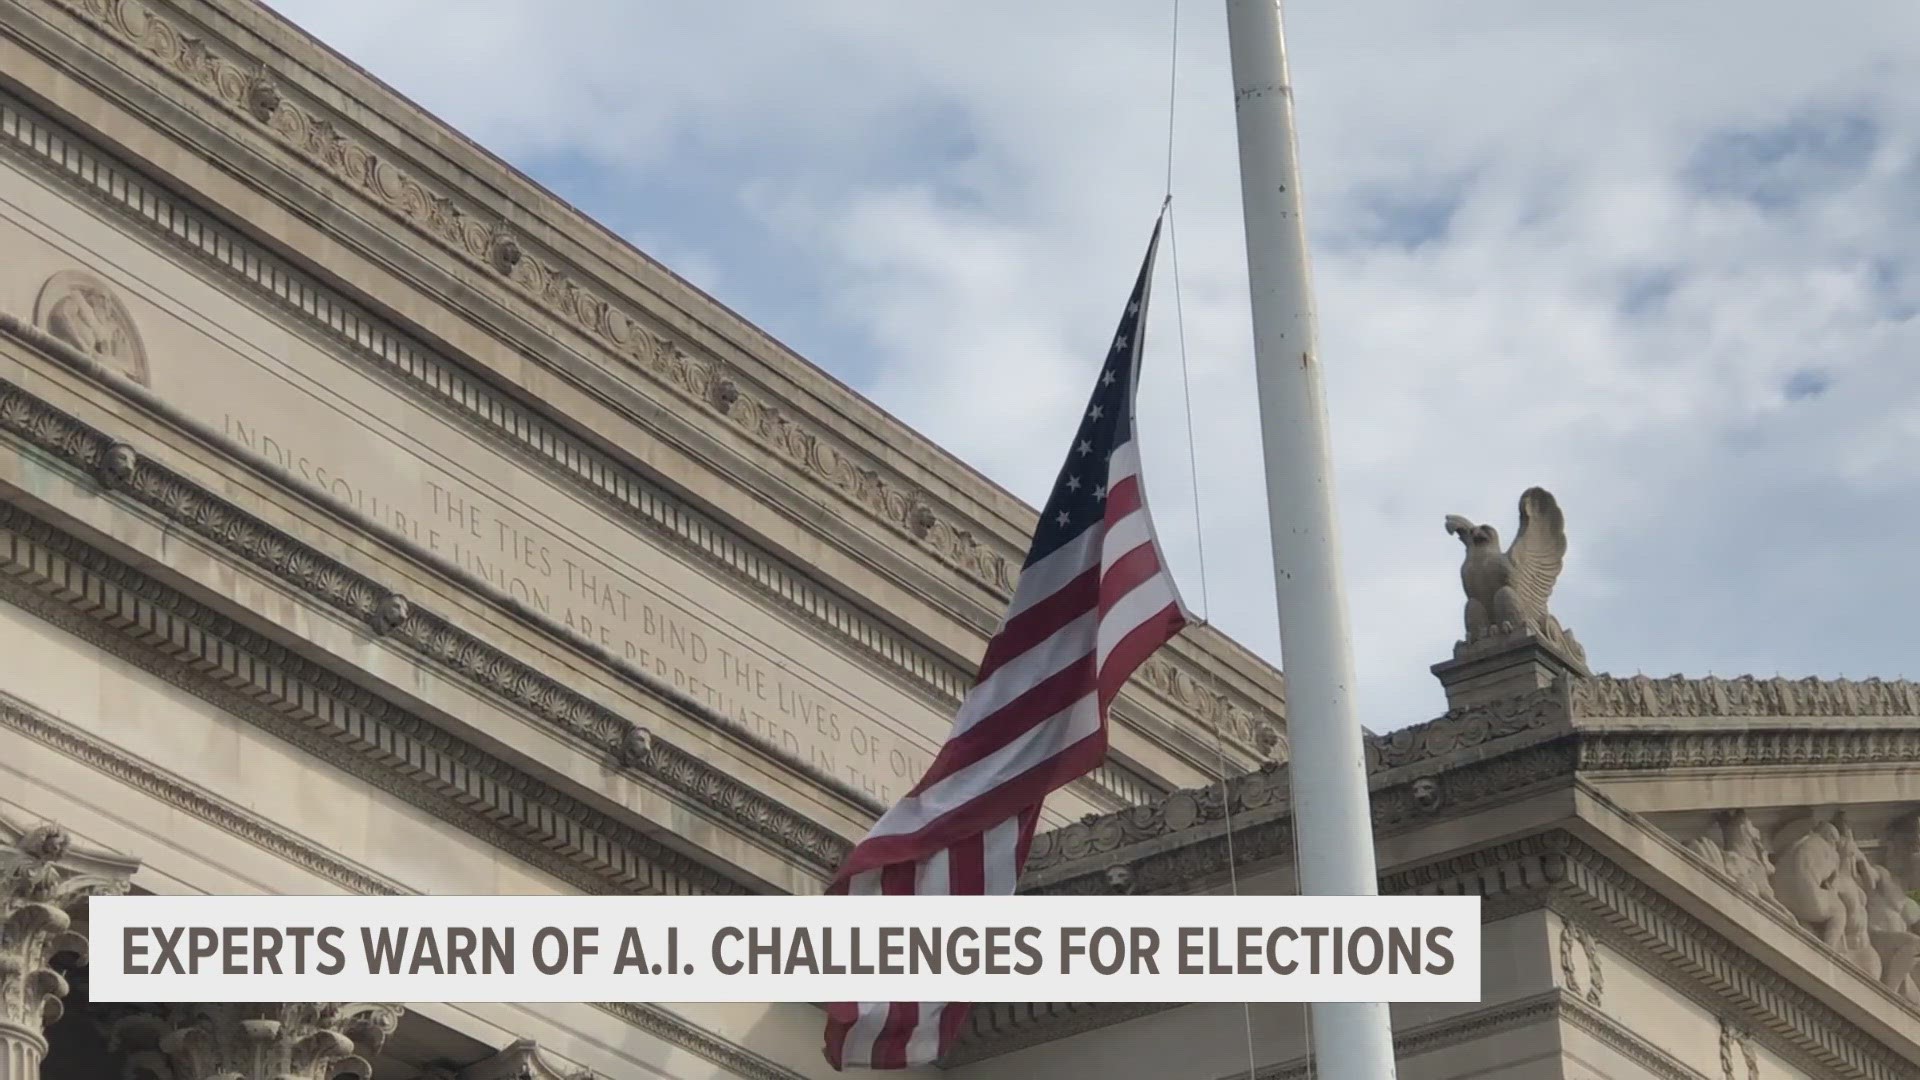 With elections coming up, AI is becoming more of a concern.